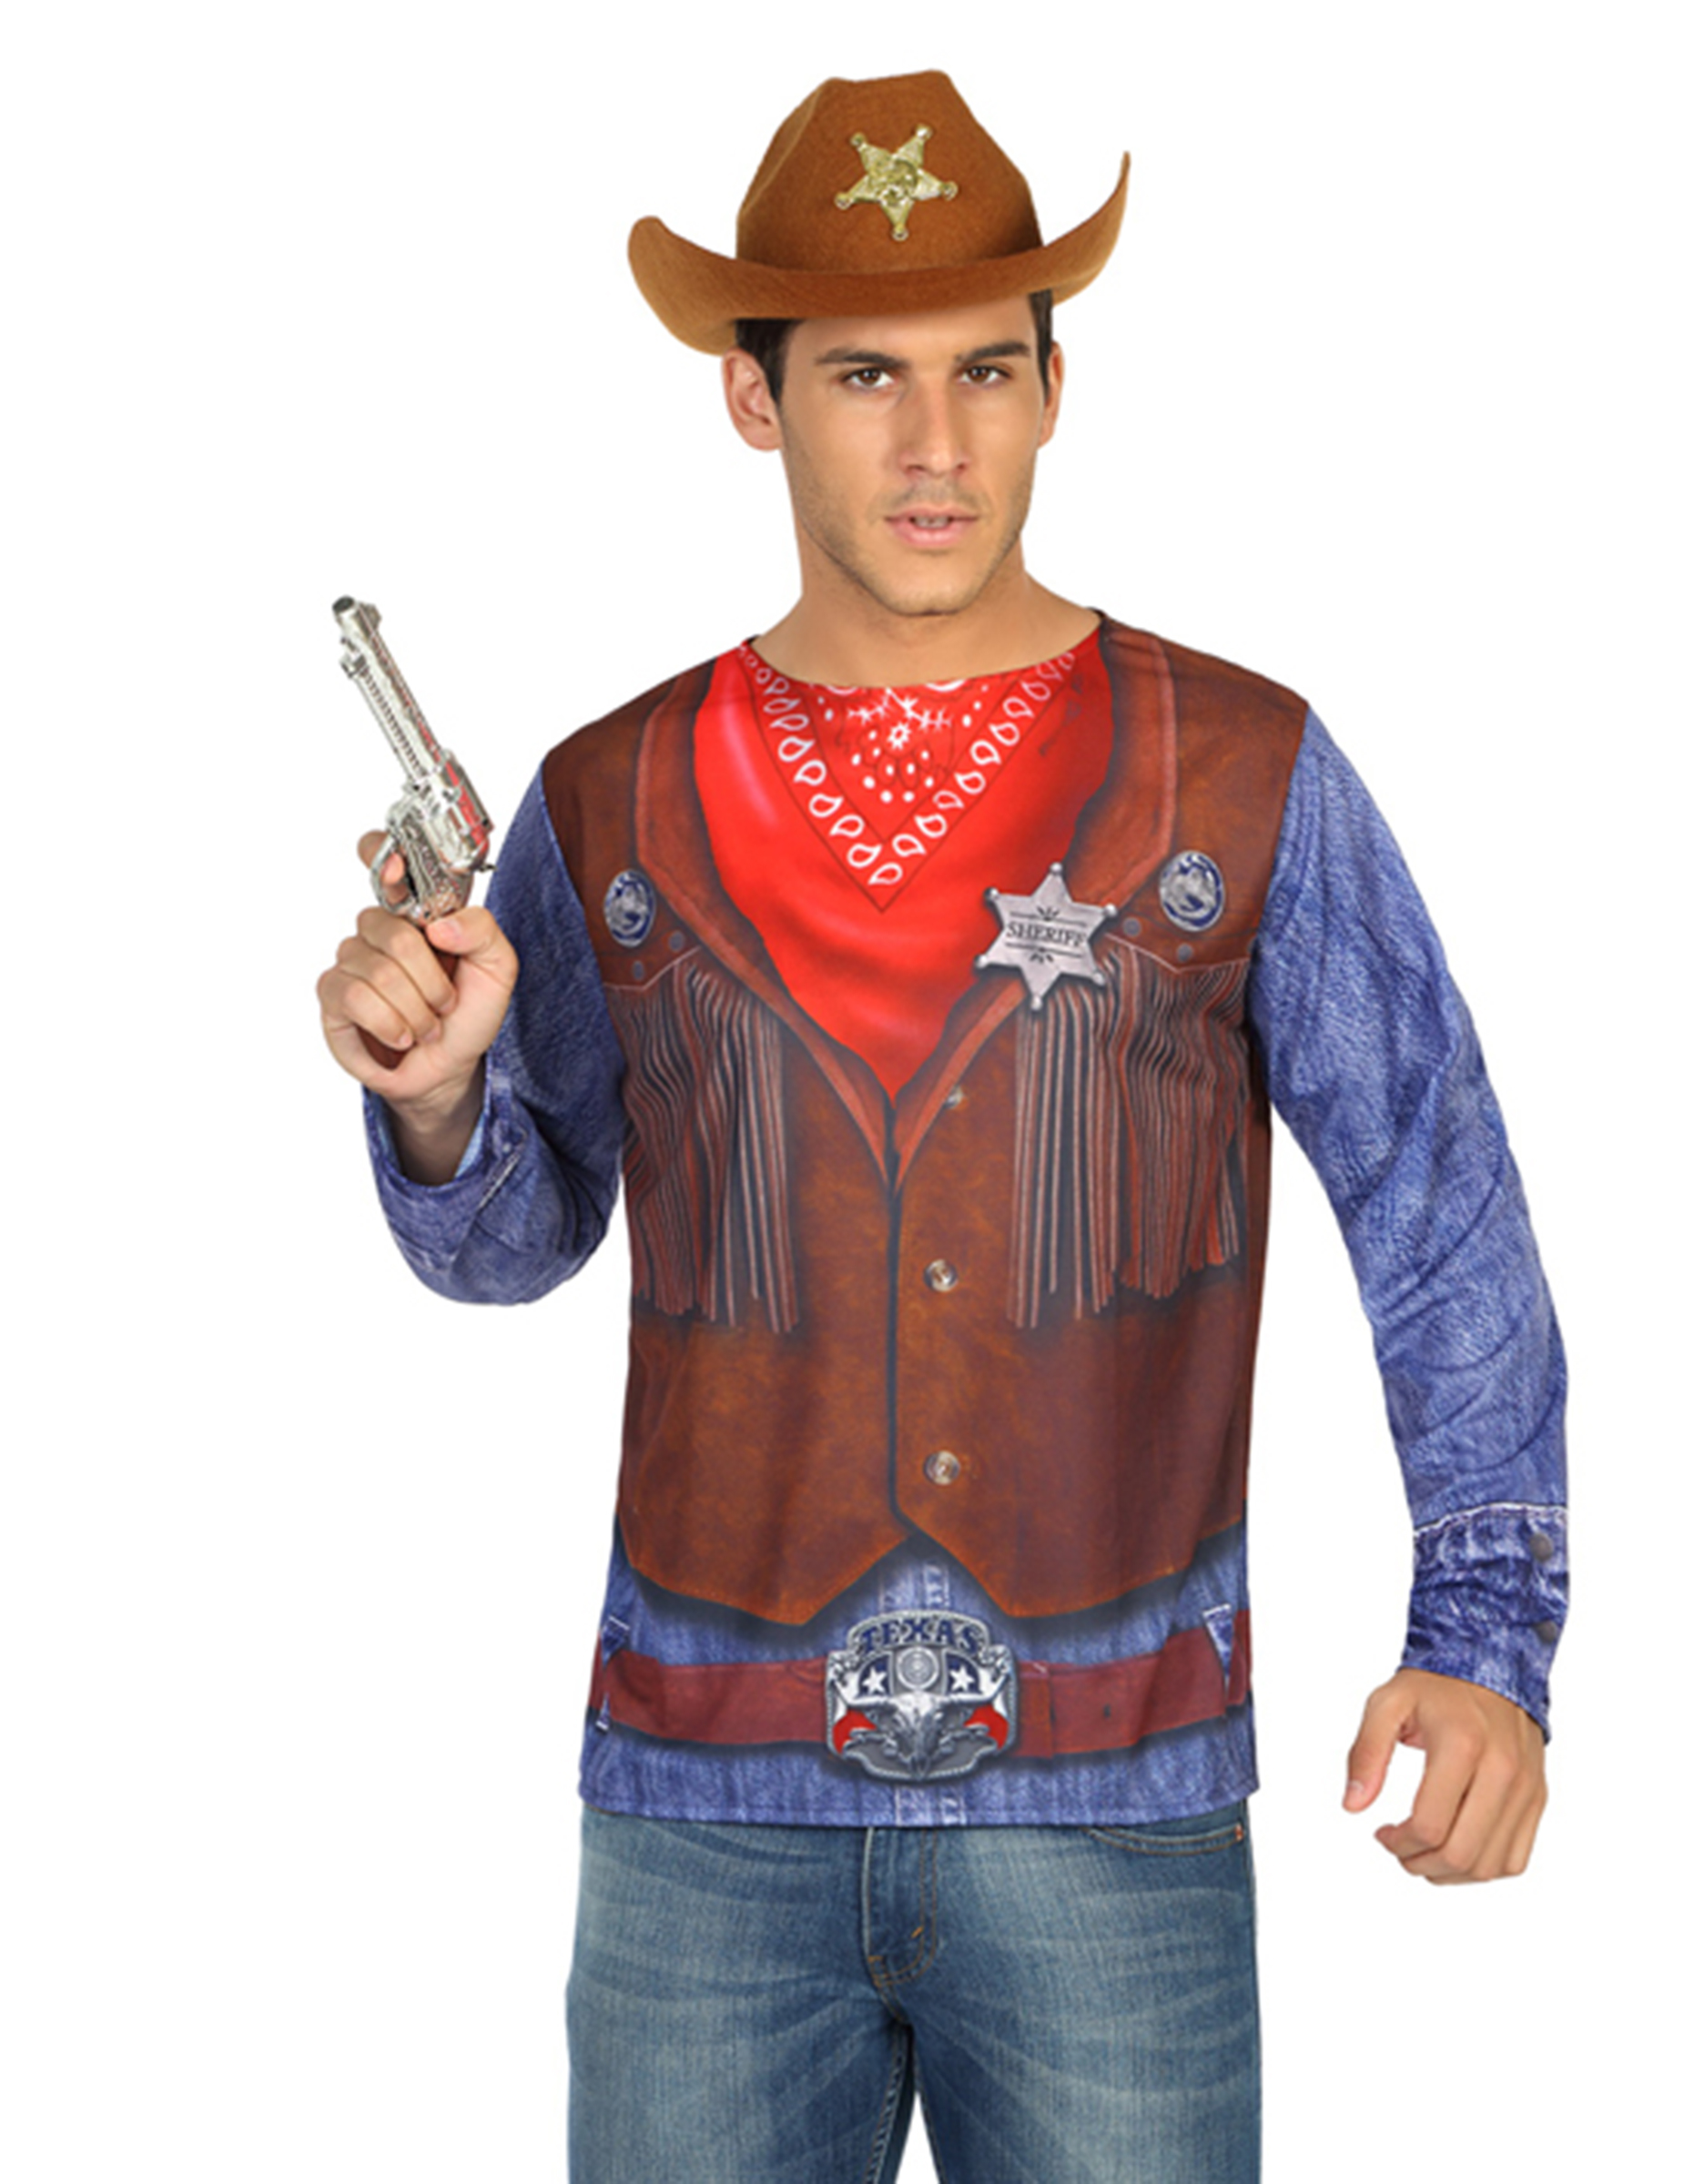 Cowboy t-shirt for men: Adults Costumes,and fancy dress costumes ...